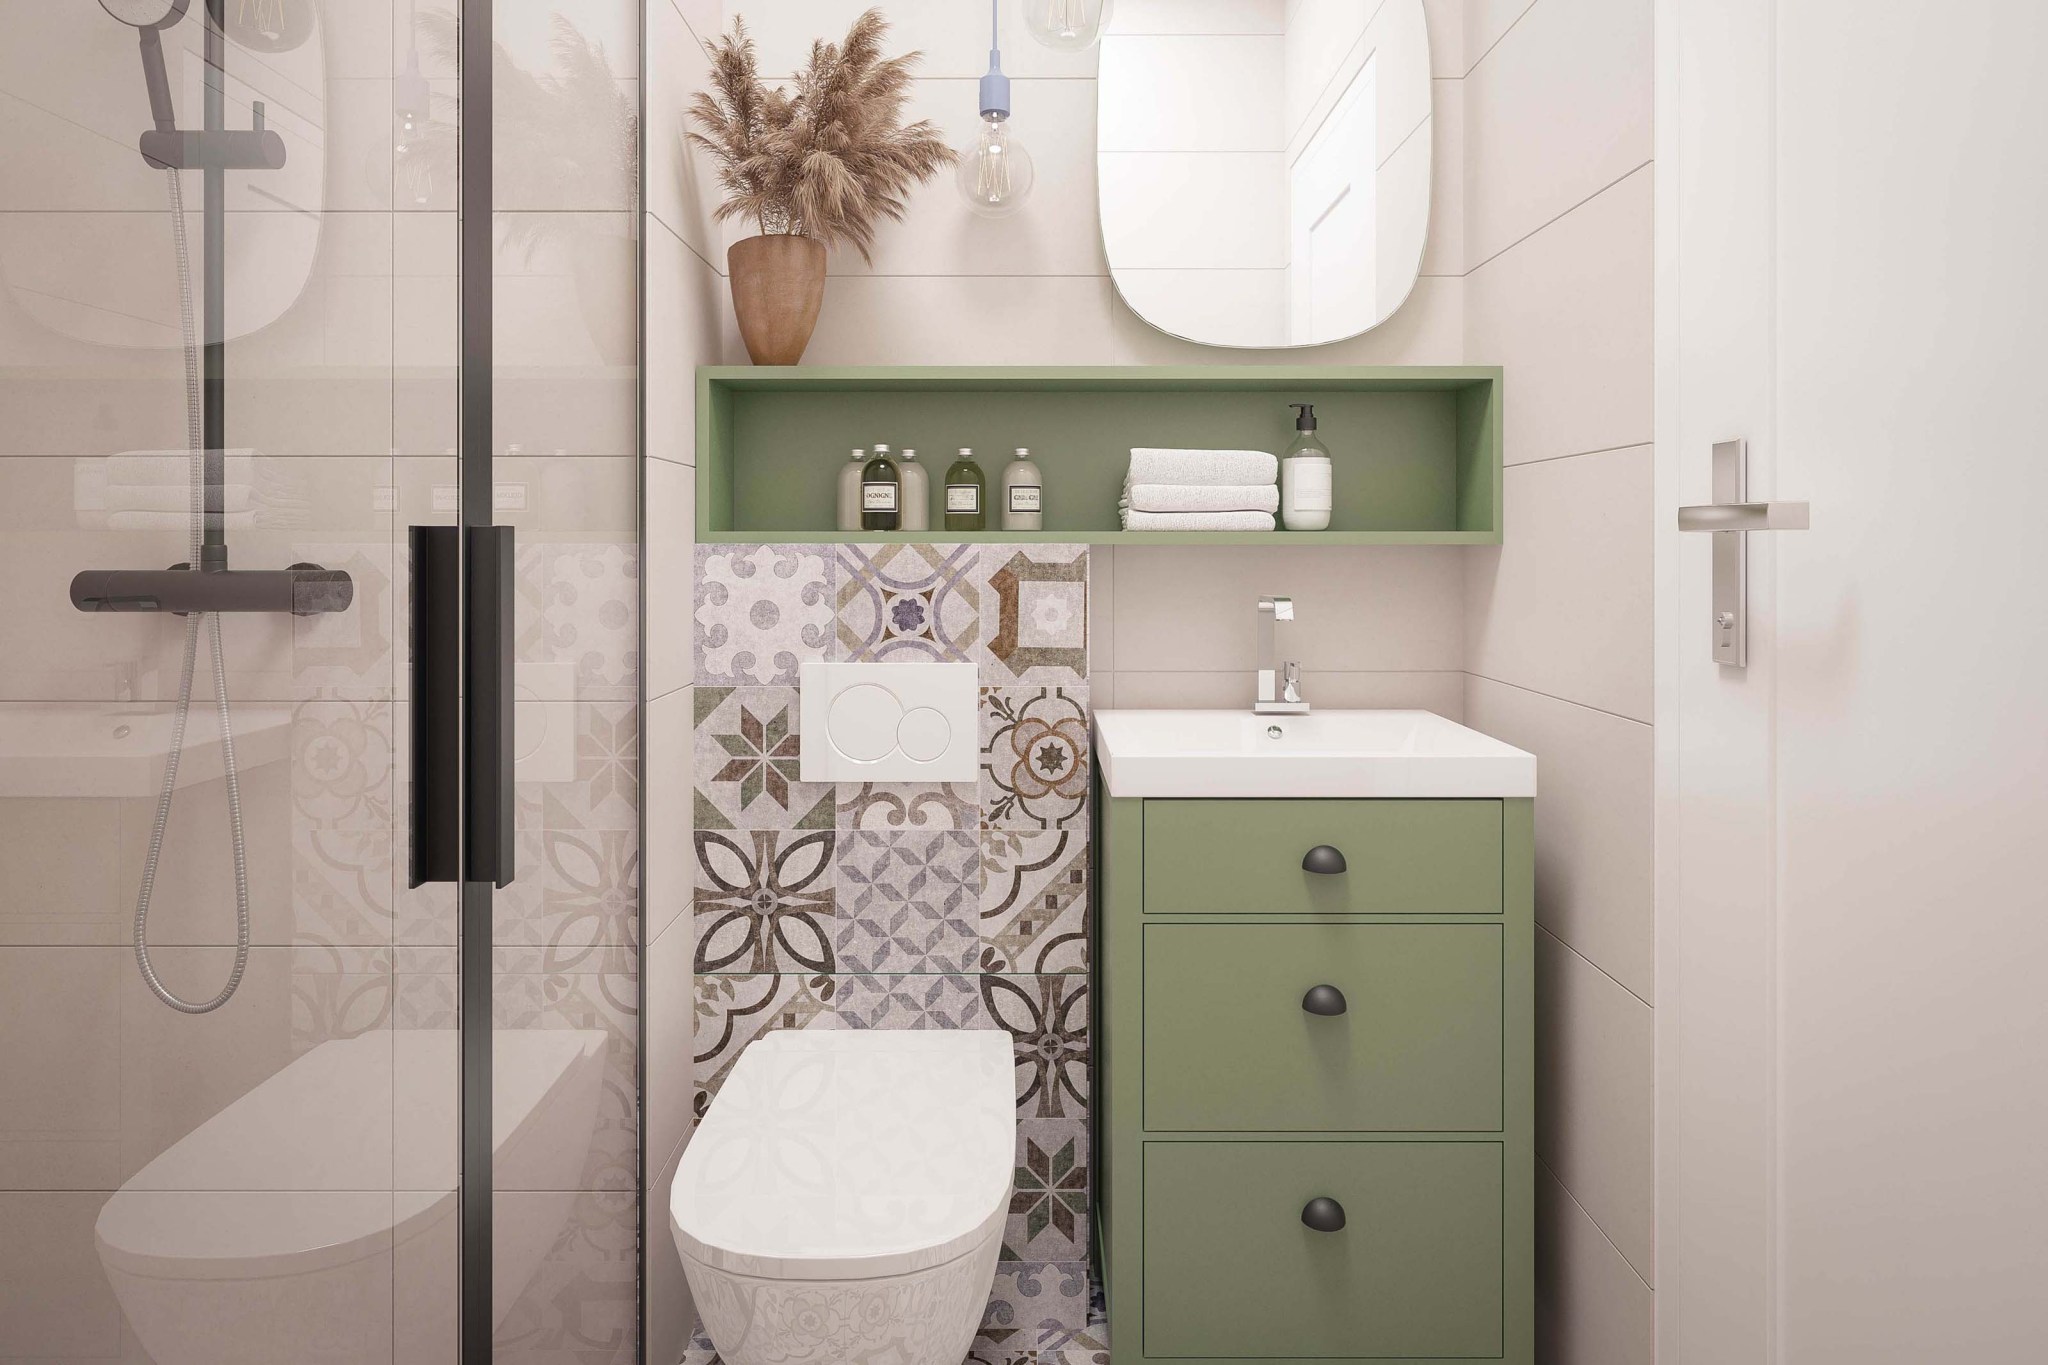 10 Bathroom Organizer Solutions the Pros Stand Behind